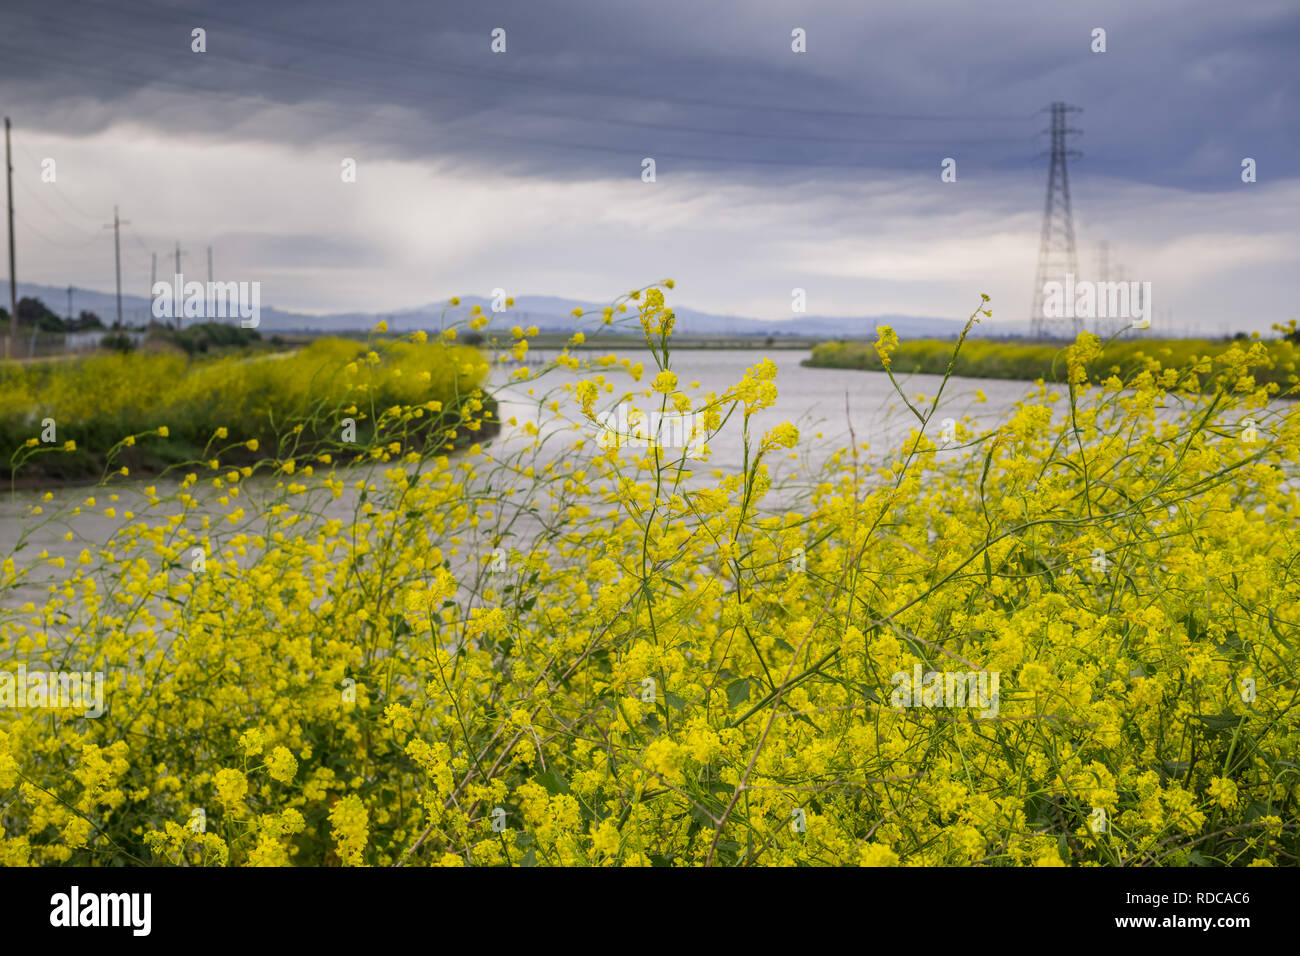 The wild mustard flowers blooming in spring on the bay trail, Sunnyvale, San Francisco bay, California Stock Photo